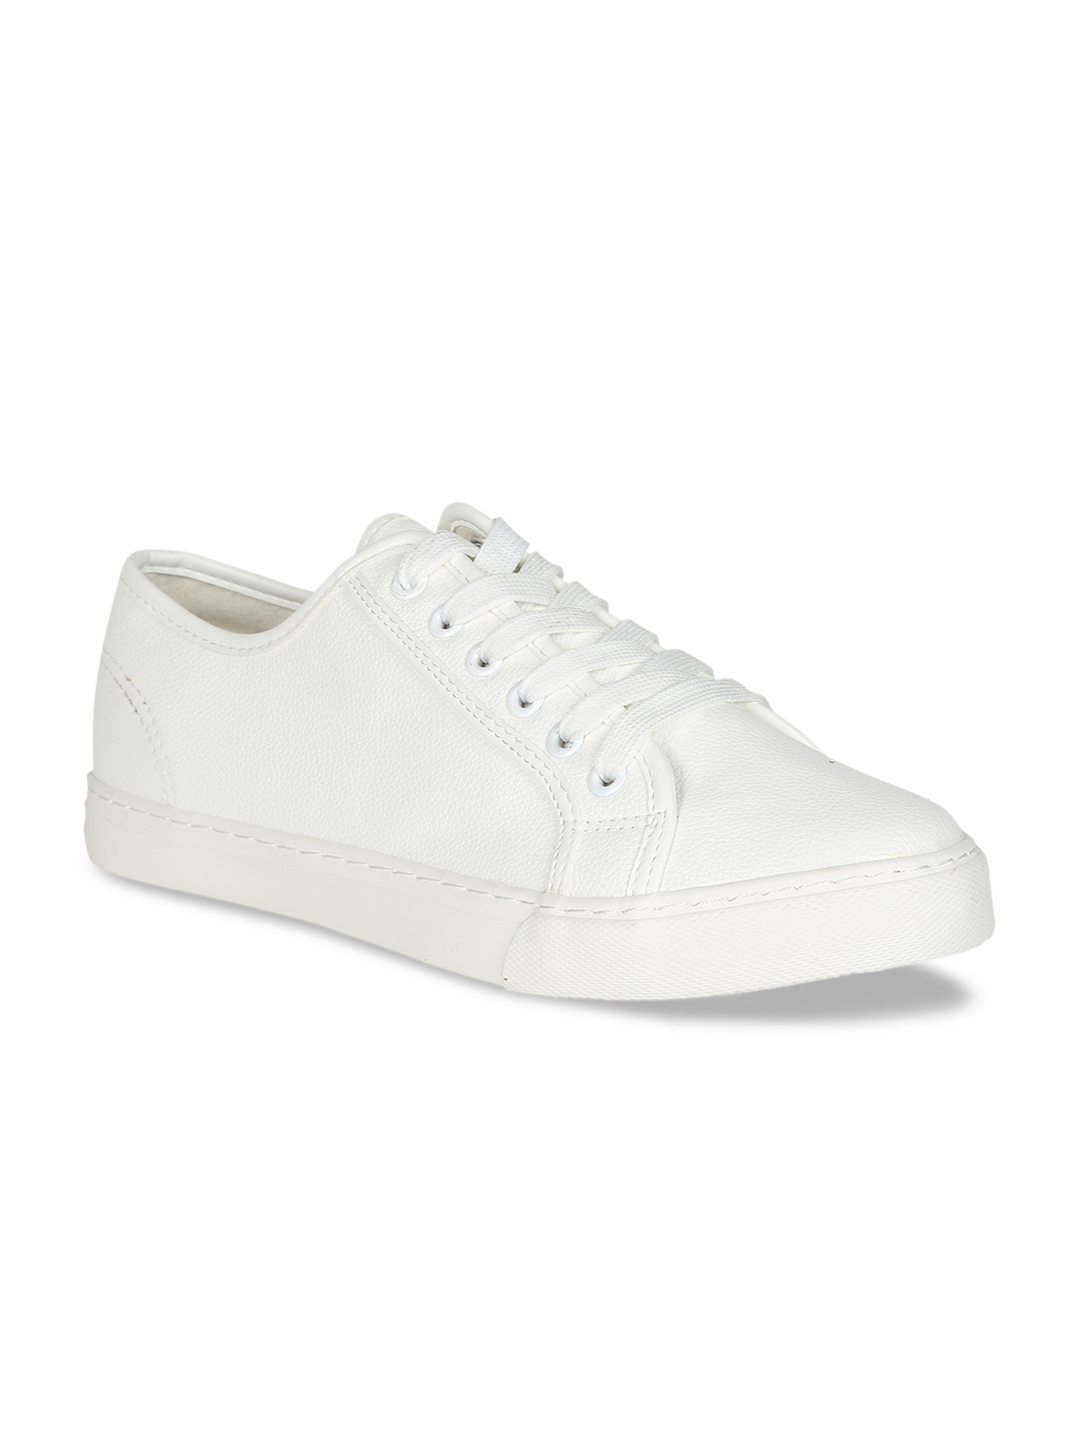 Buy Peter England Men White Solid Sneakers - Casual Shoes for Men ...